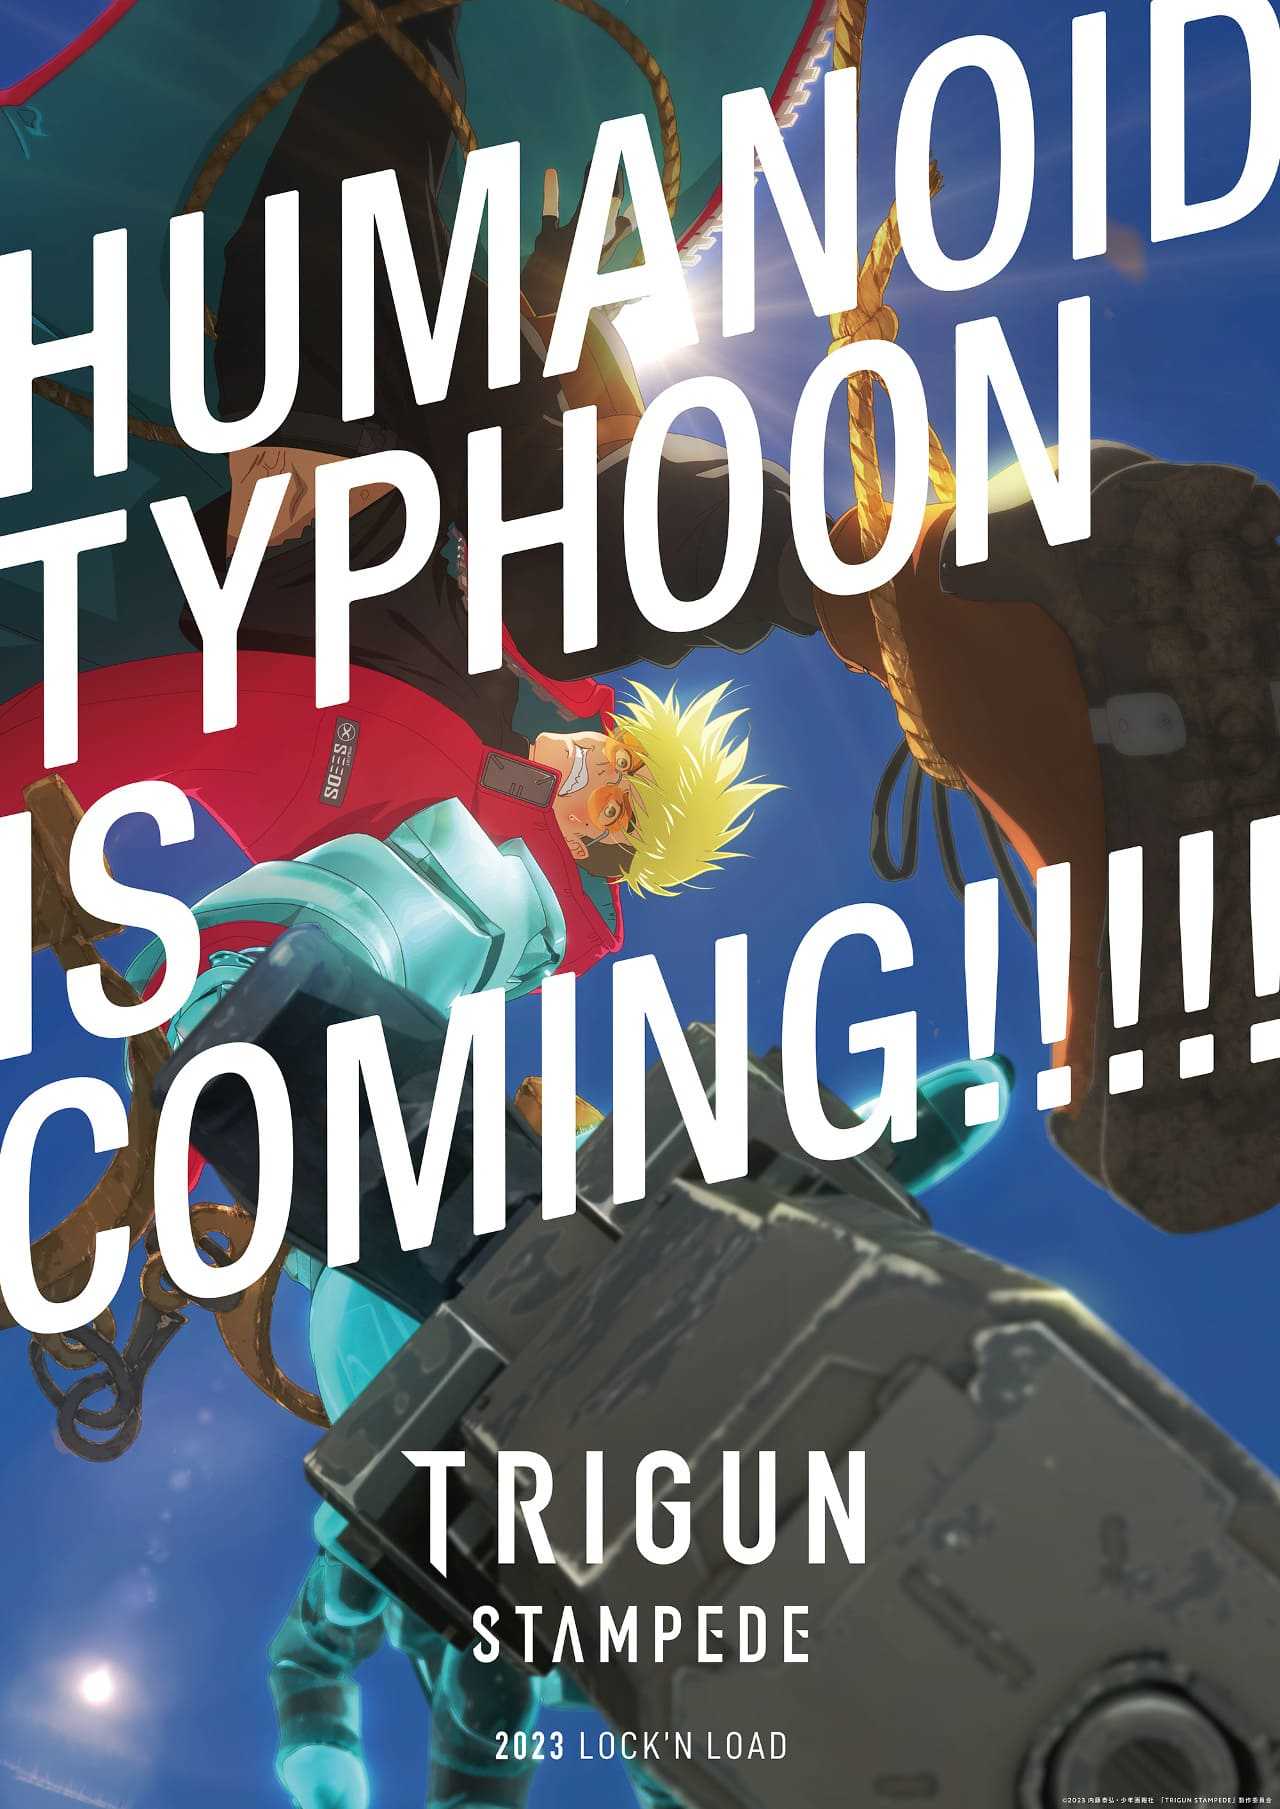 Trigun Stampede: The first real trailer for the anime reboot is here